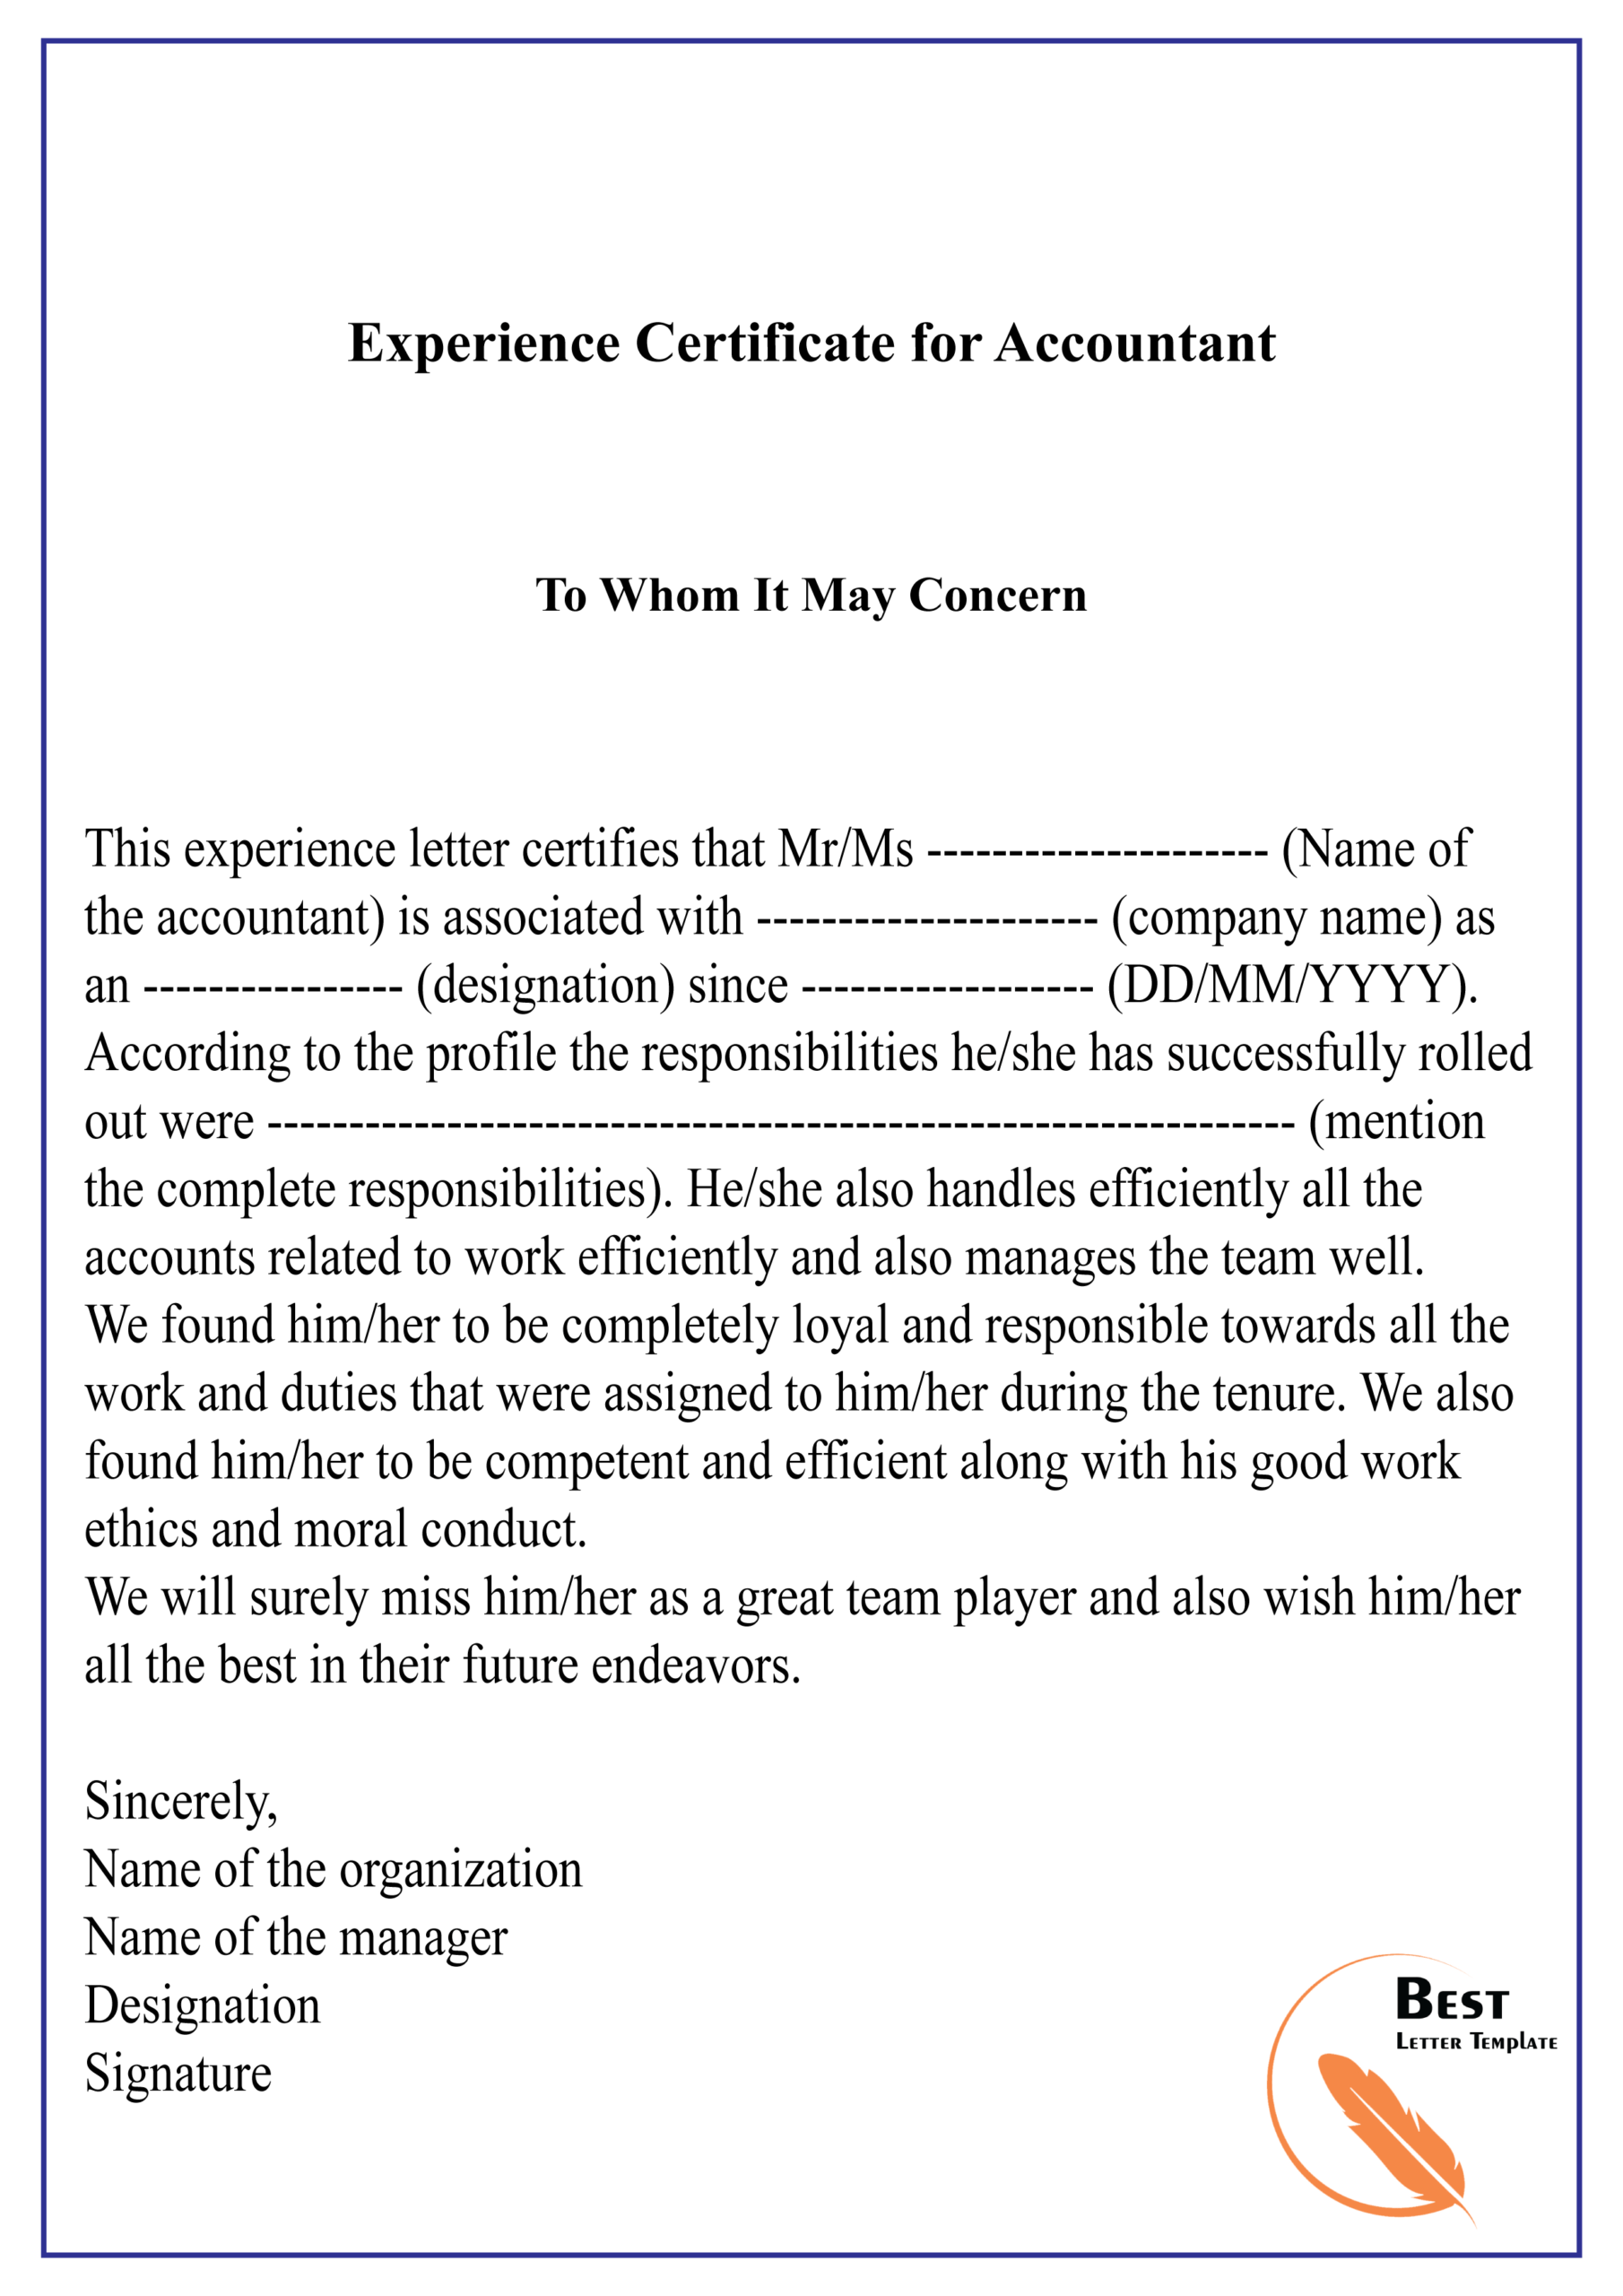 Experience Certificate For Accountant 01 | Best Letter Template Pertaining To Certificate Of Experience Template